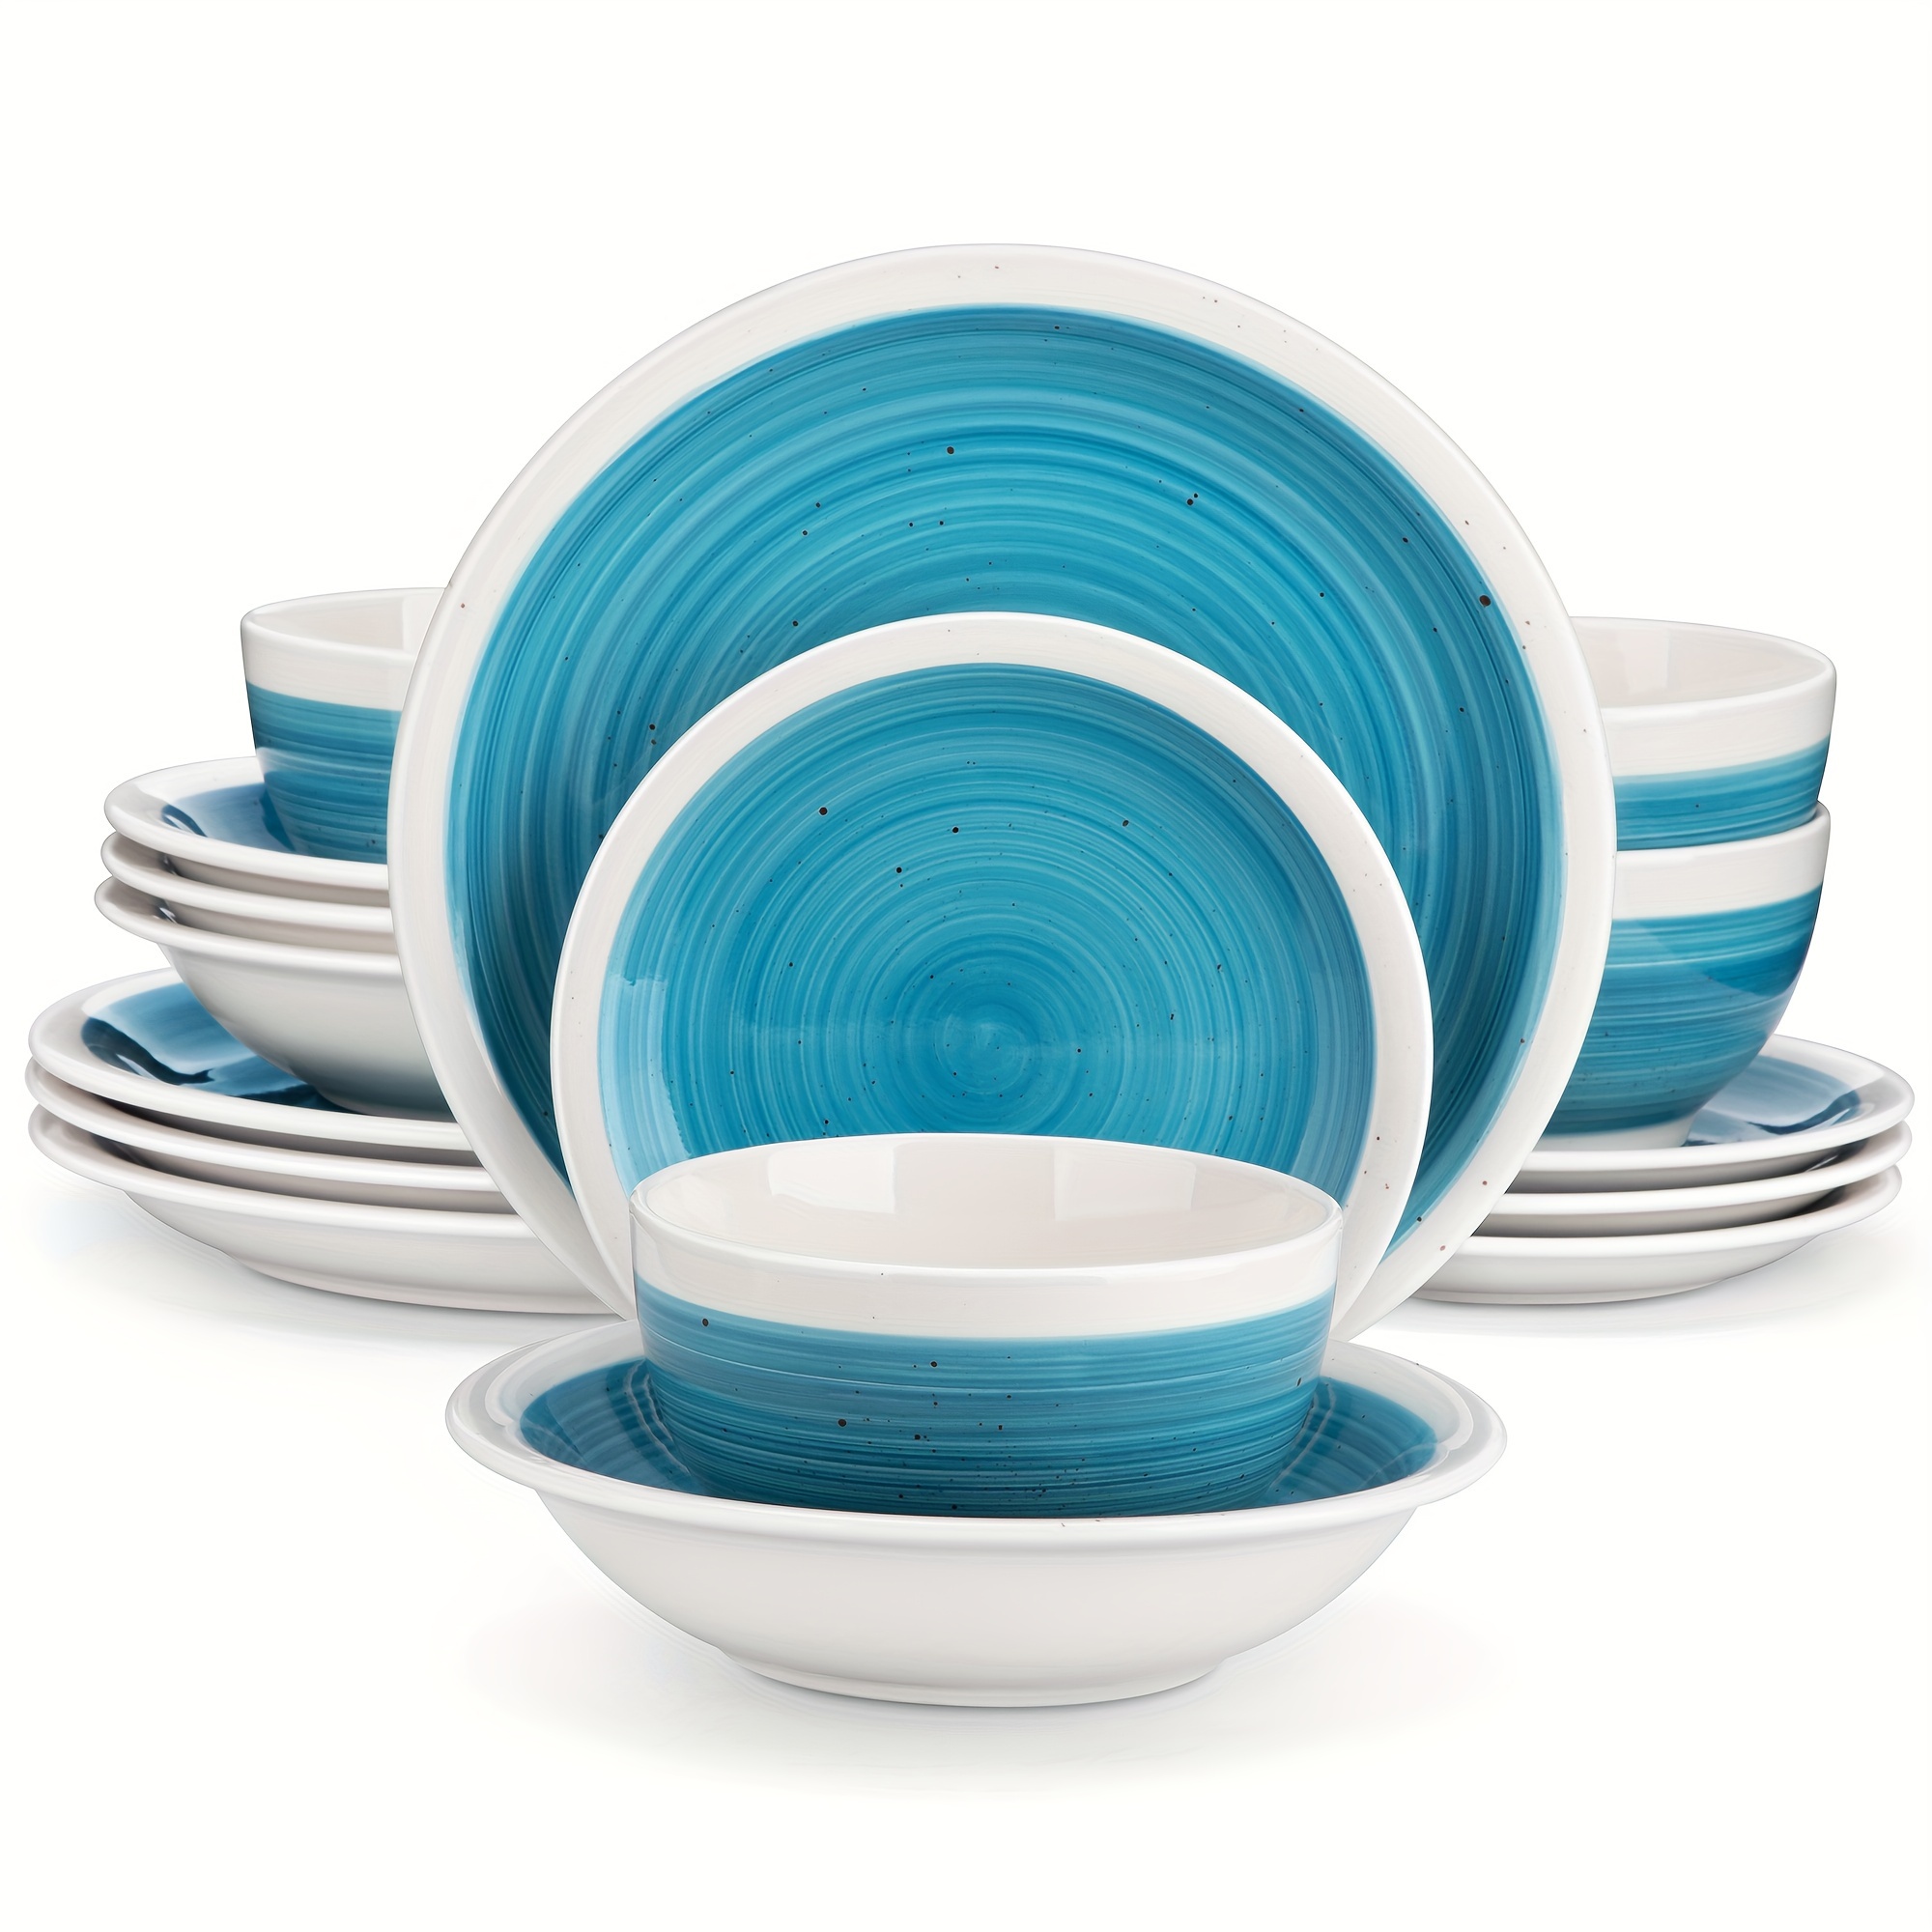 

16pcs Dinnerware Set, Reusable Blue Tableware, Porcelain Dining Set, Washable Plate Bowl , For Home Kitchen, Restaurant And Party, Kitchen Organizers And Storage, Kitchen Accessories